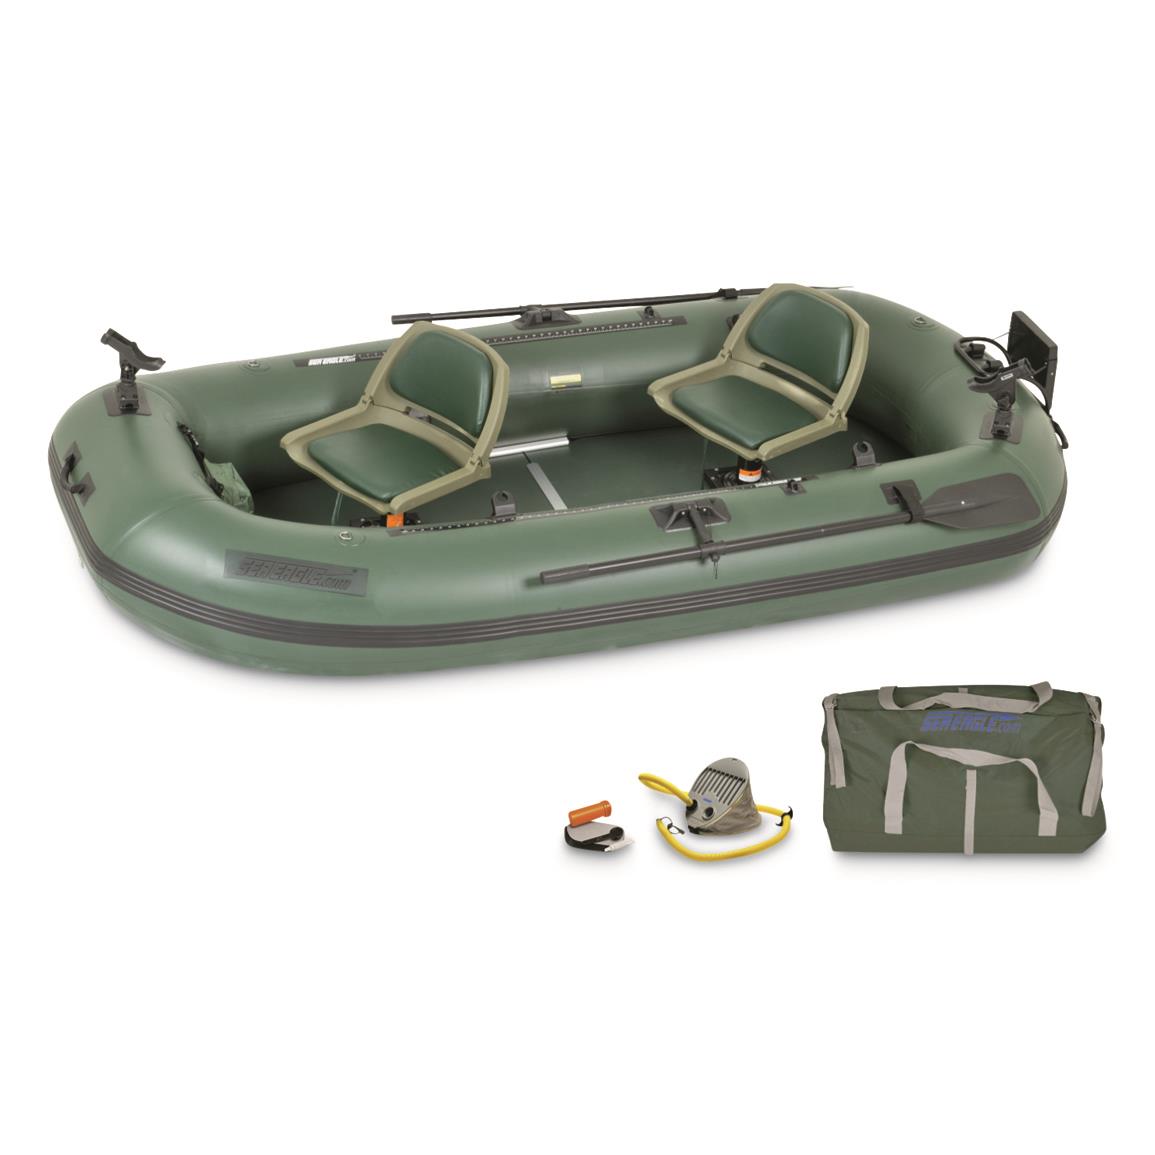 Sea Eagle Stealth Stalker 10 Frameless Inflatable Fishing Boat with Pro ...